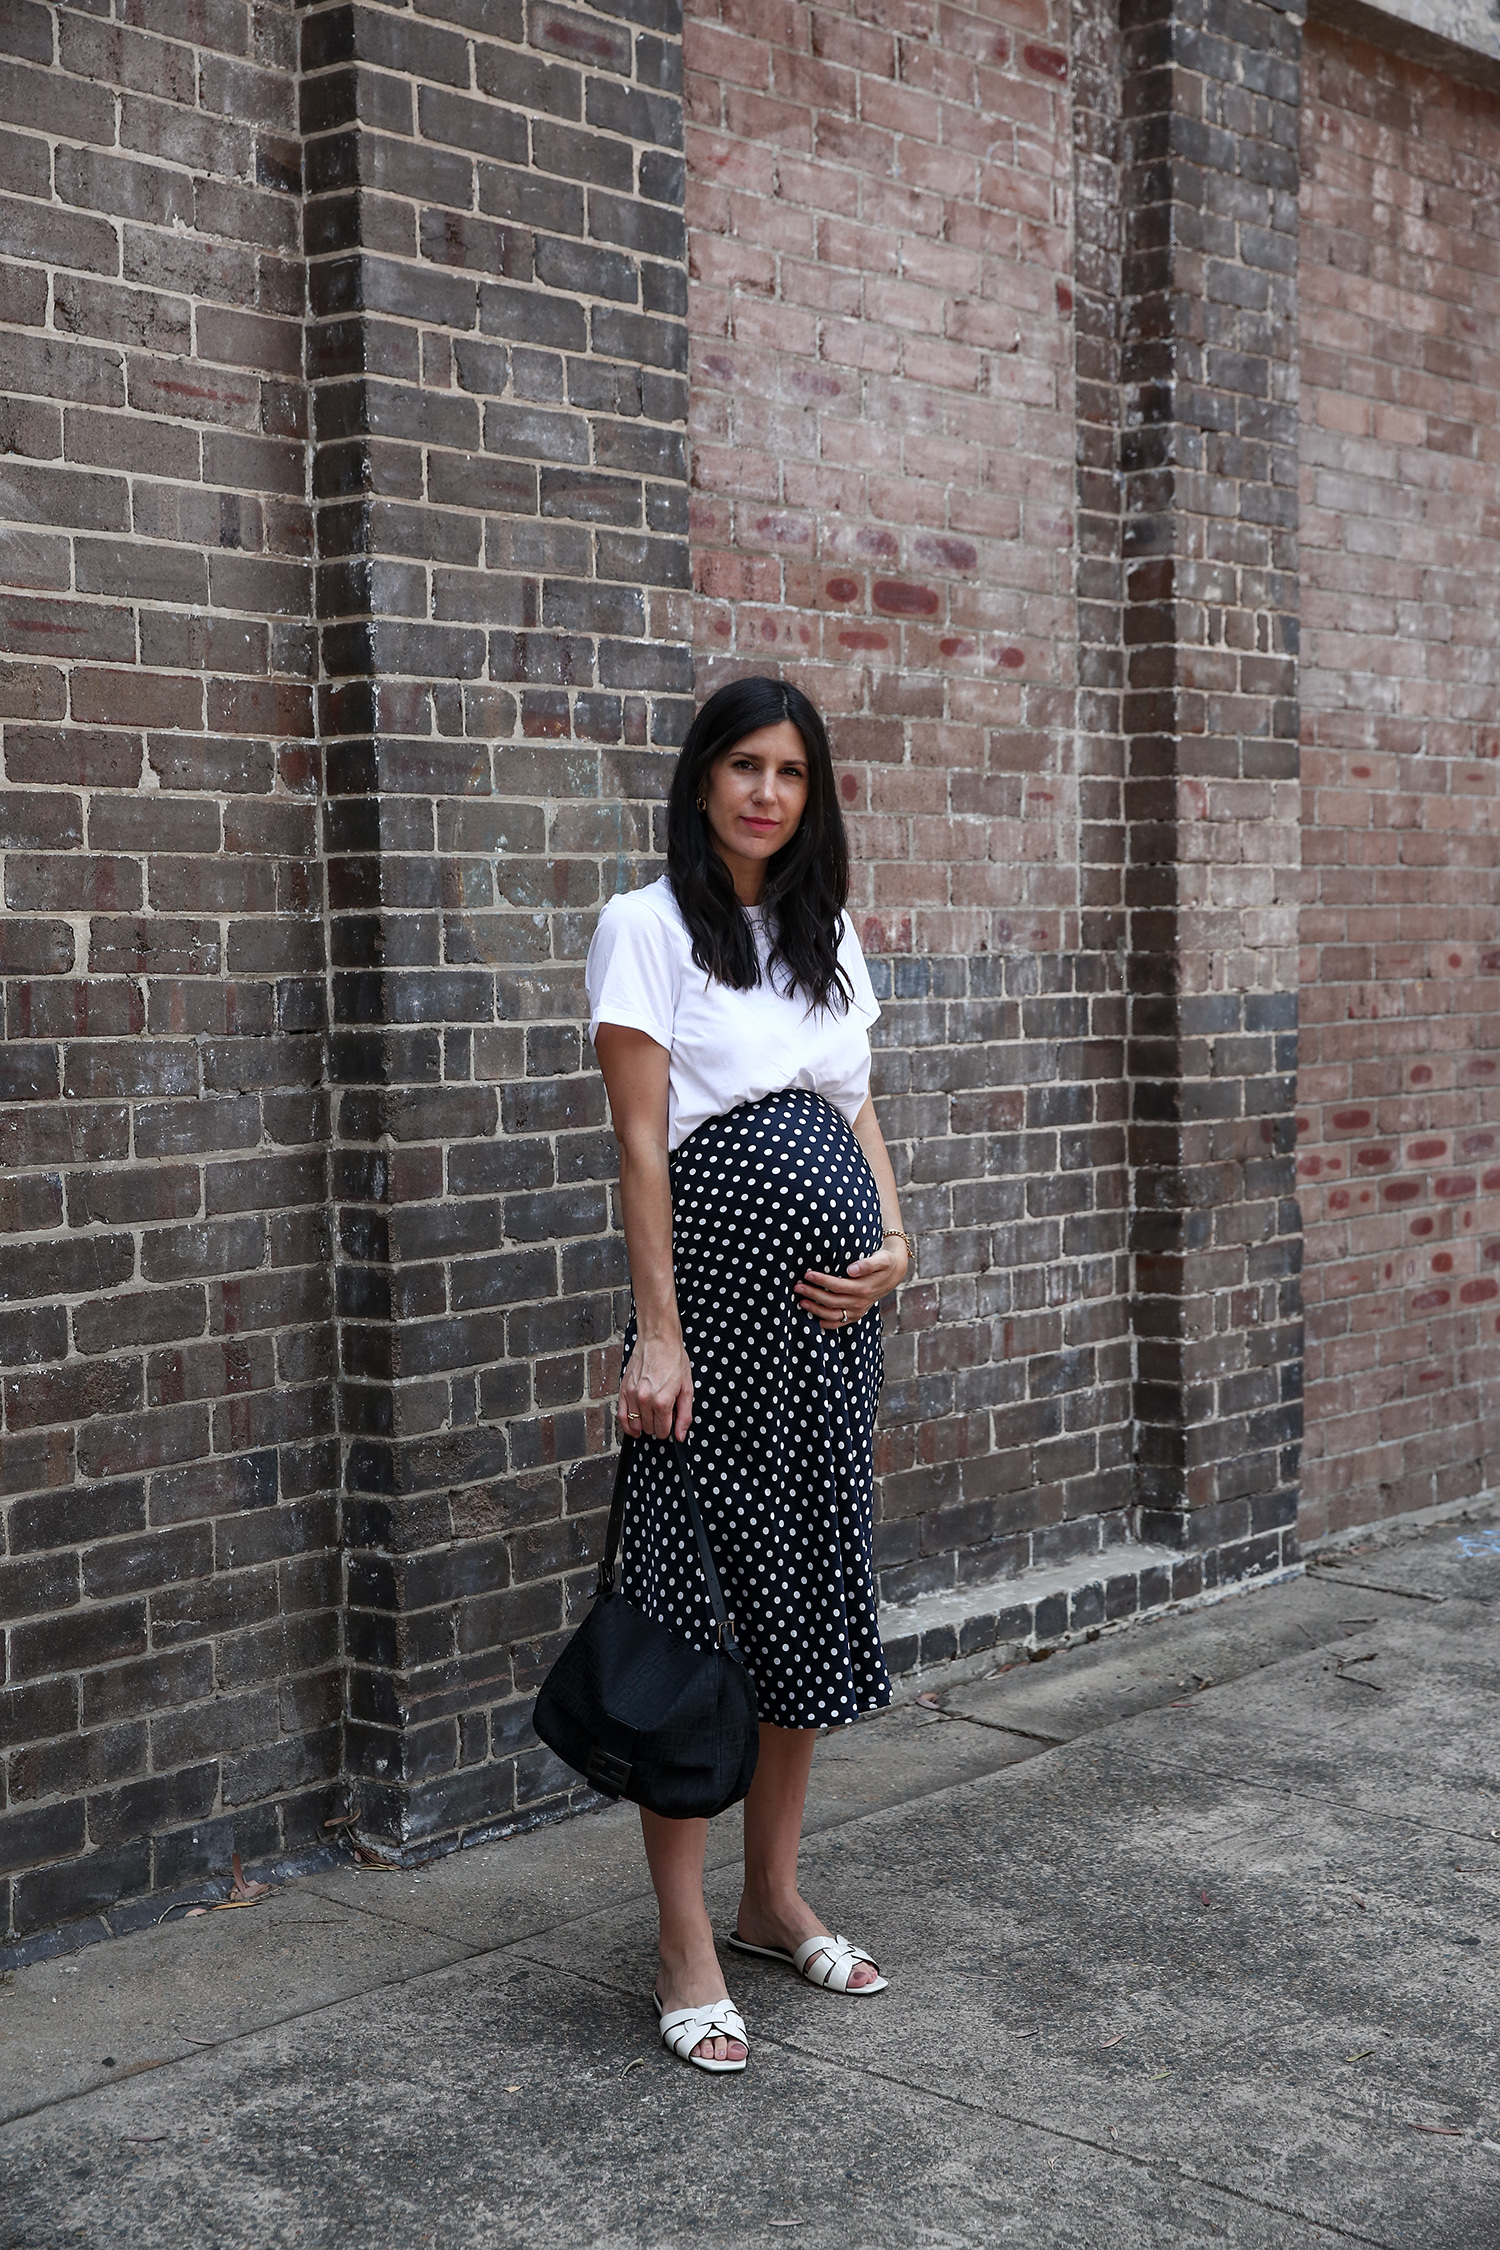 Fall Monochrome Outfit | Fall maternity outfits, Maternity fashion, Casual maternity  outfits